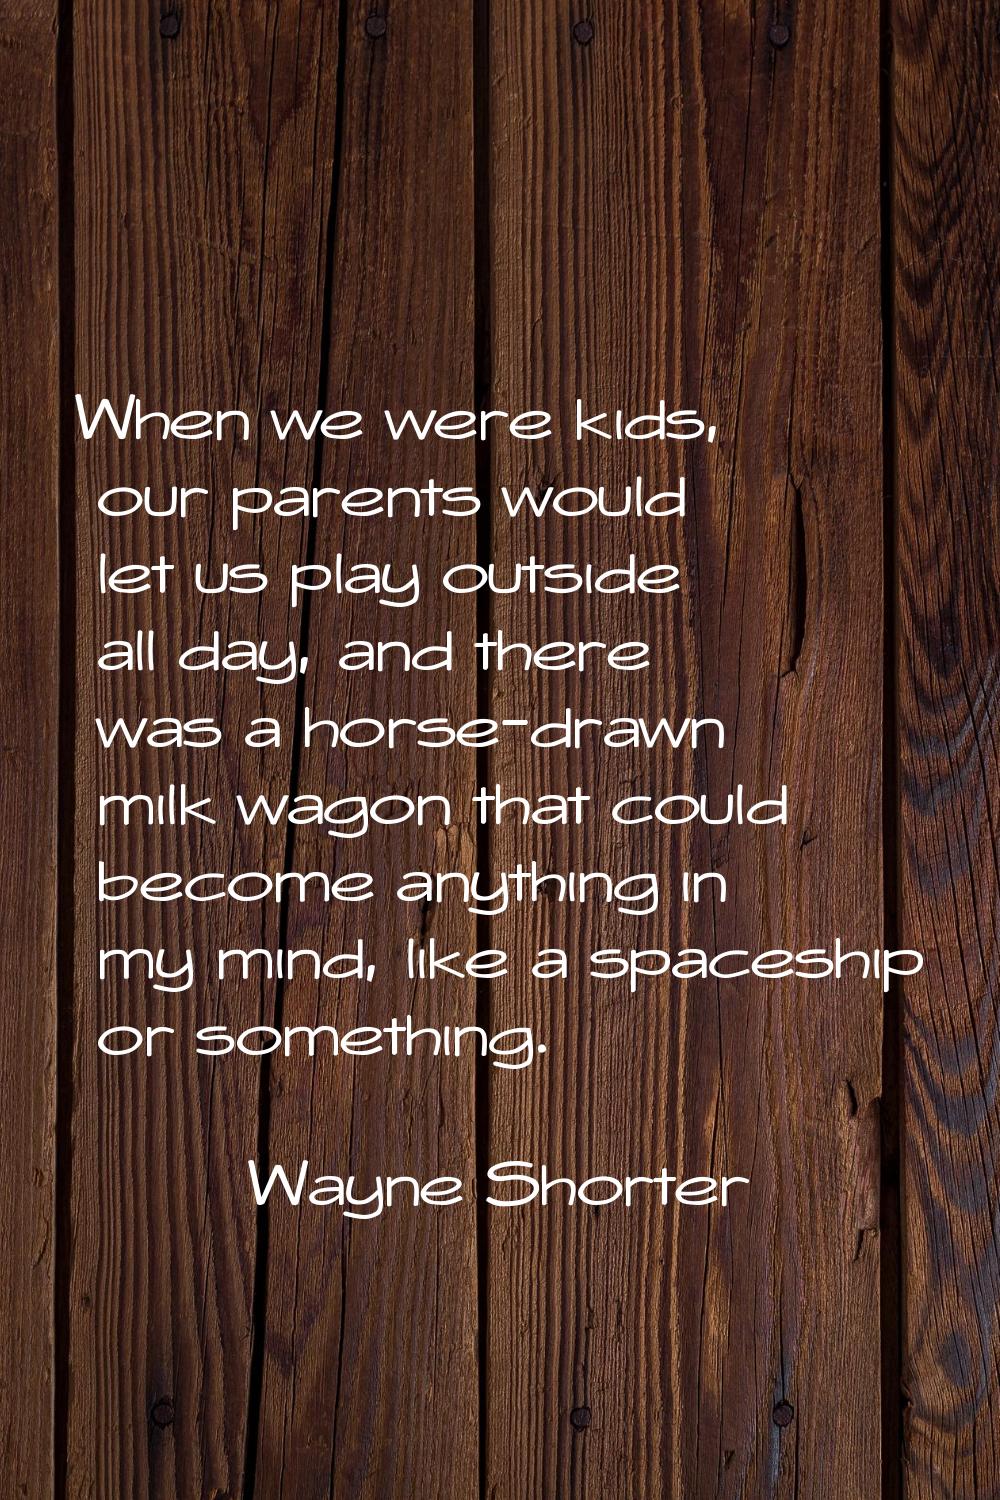 When we were kids, our parents would let us play outside all day, and there was a horse-drawn milk 